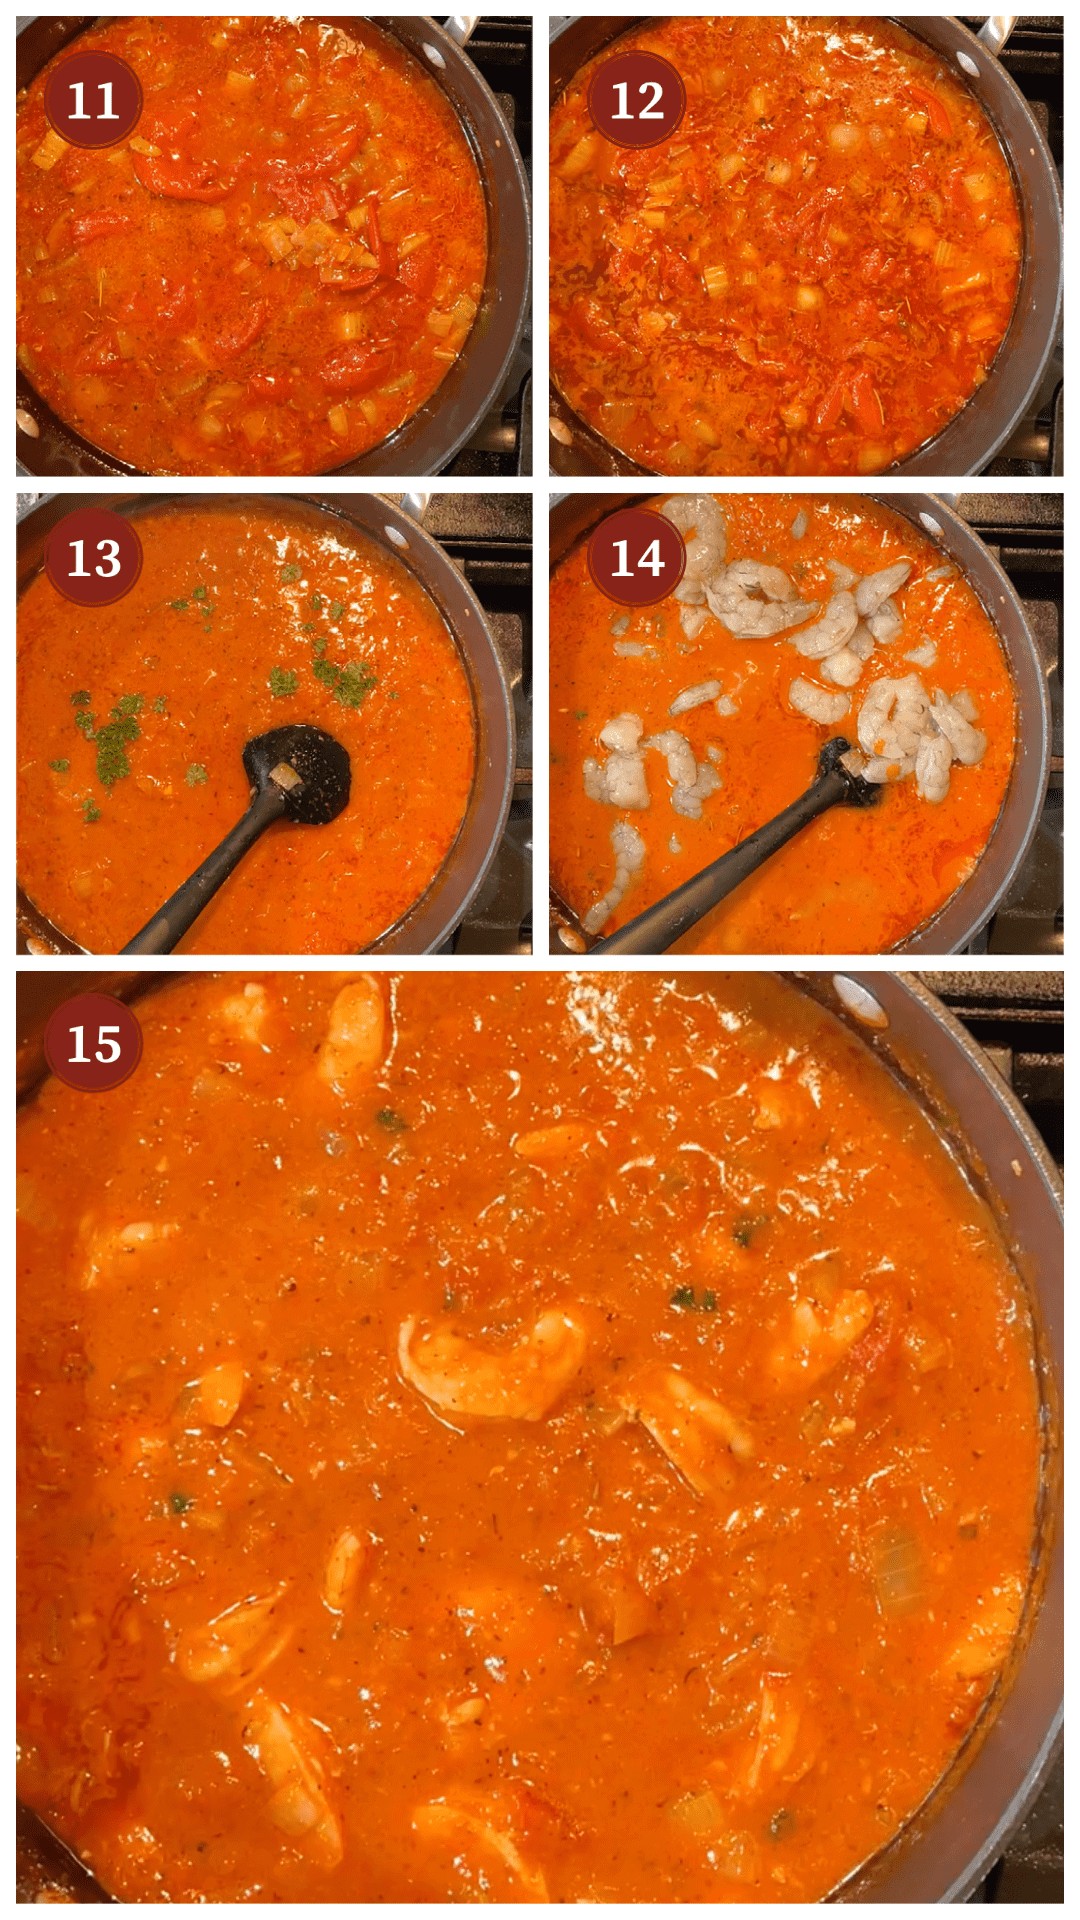 A collage of images showing how to make shrimp creole, steps 11 - 1 q5.